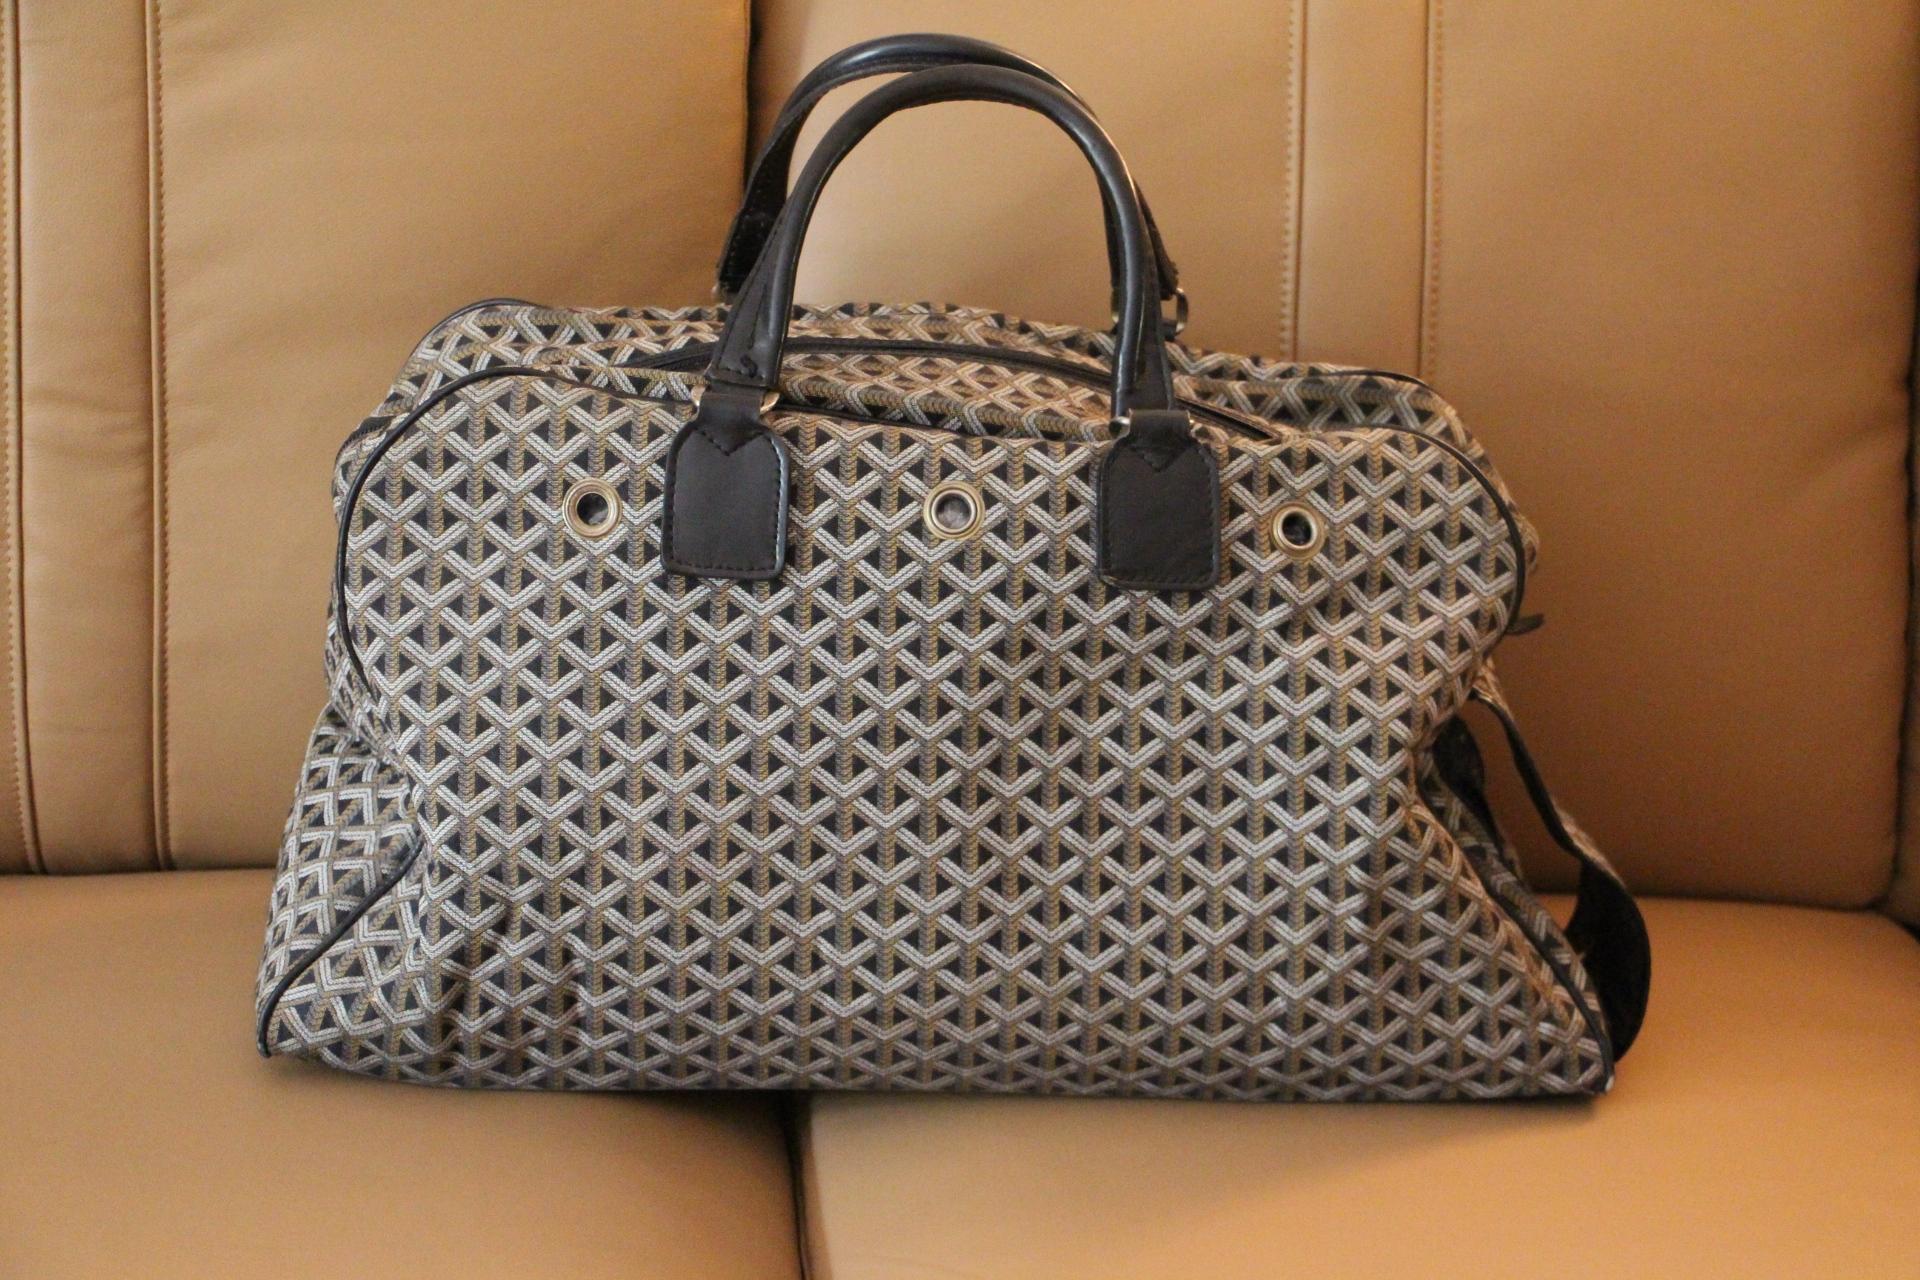 This superb Goyard pets bag features the very sought after woven canvas as well as black leather trim and handles.Its large handles are very comfortable and sturdy.
It features a long horizontal zip on its front as well as little holes for animal